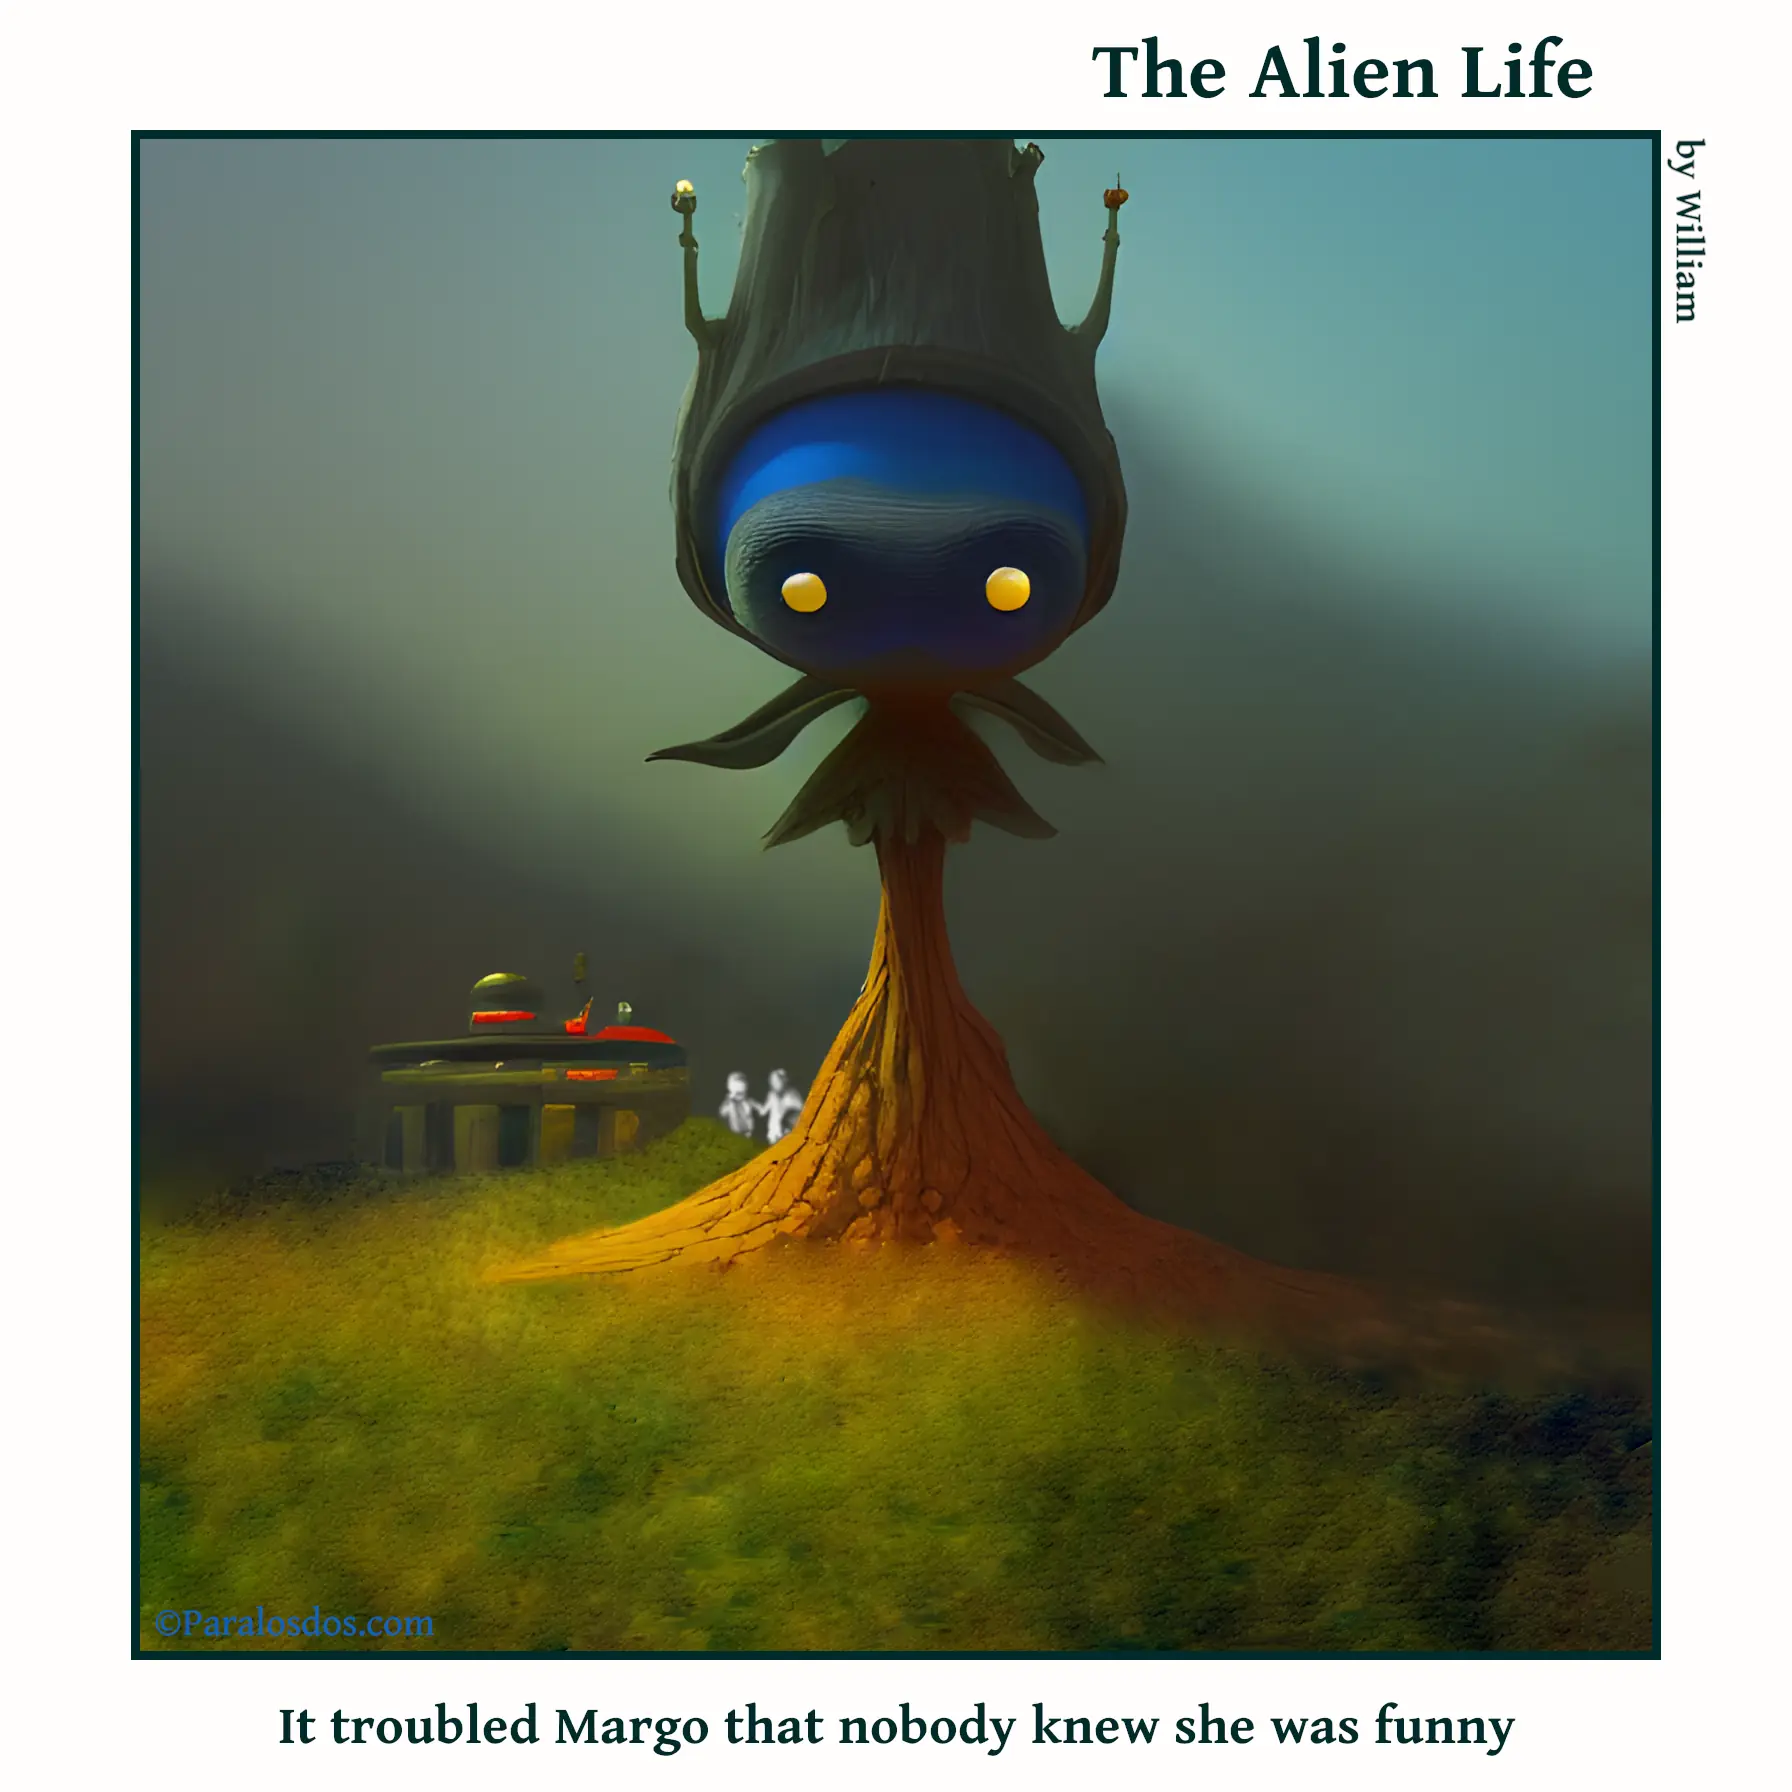 The Alien Life, one panel Comic. A very scary, imposing, looking alien is staring intensely straight ahead. The caption reads: It troubled Margo that nobody knew she was funny.